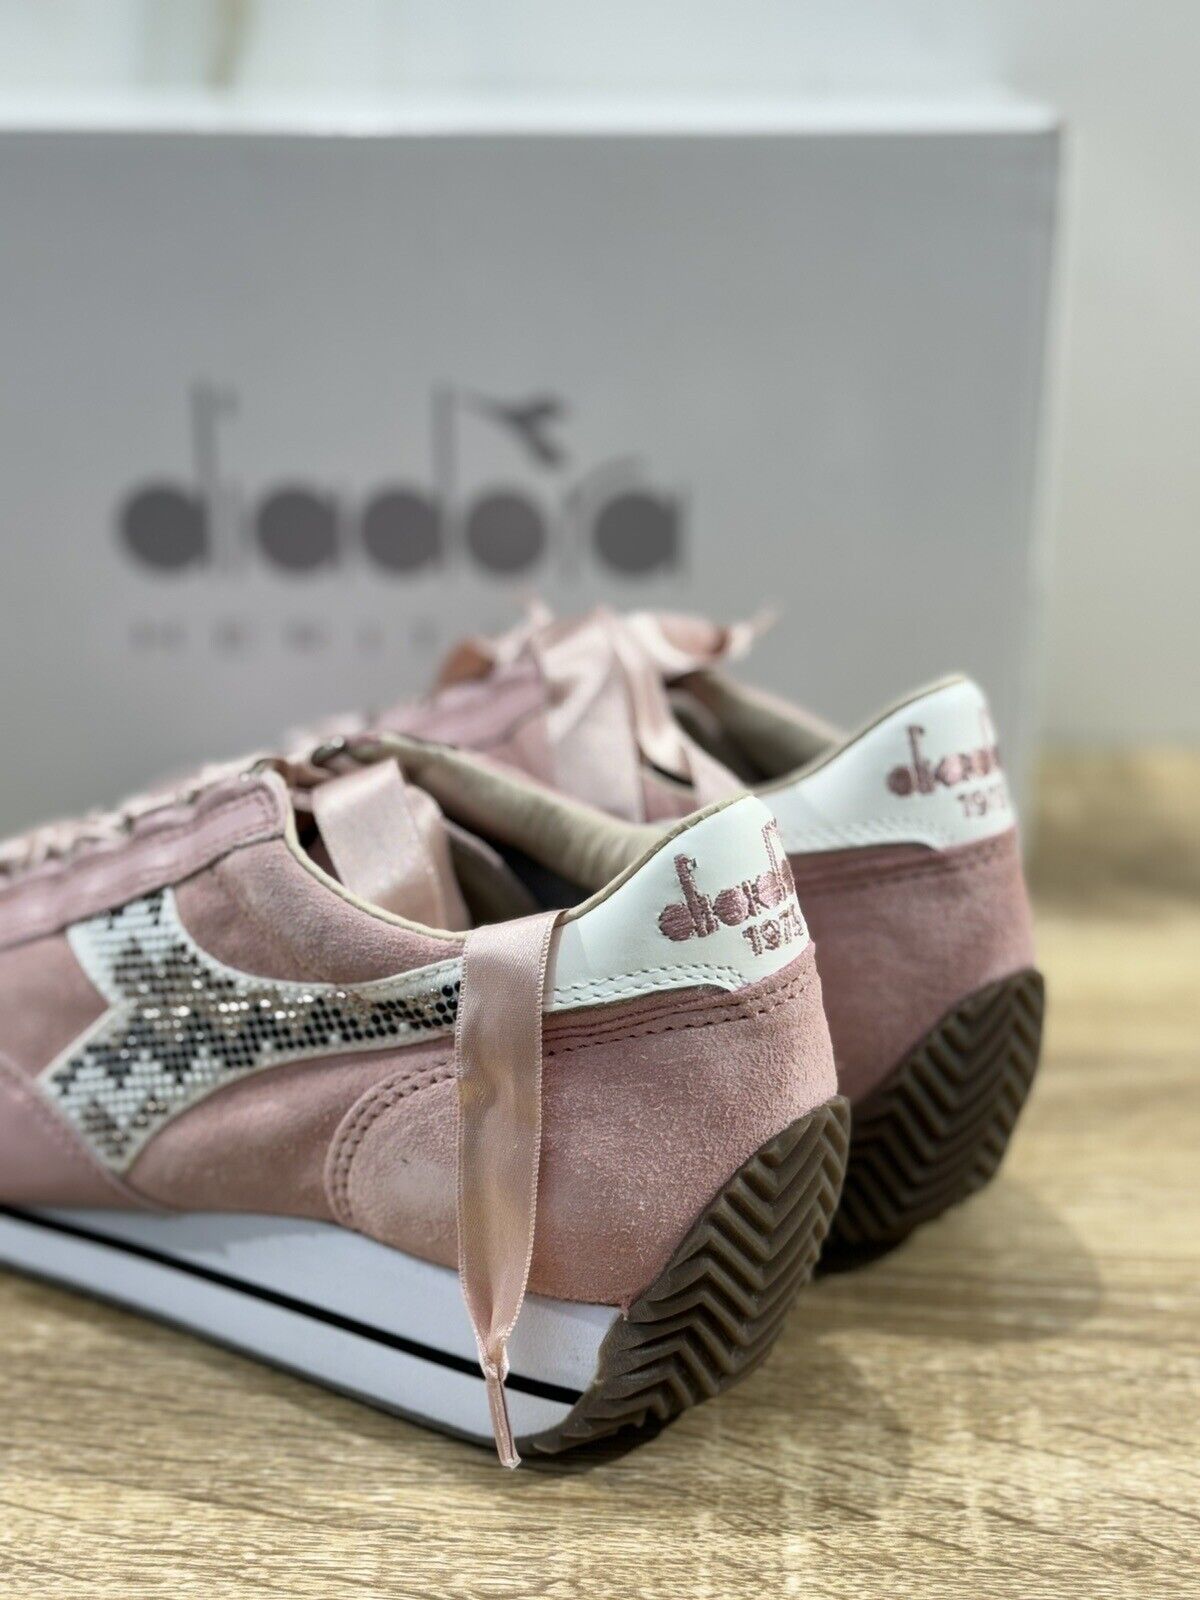 Diadora Heritage Sneaker donna Equipe w HH Pearls Pelle Rosa Limited 3 –  CALZATURE ANGELINI 1948